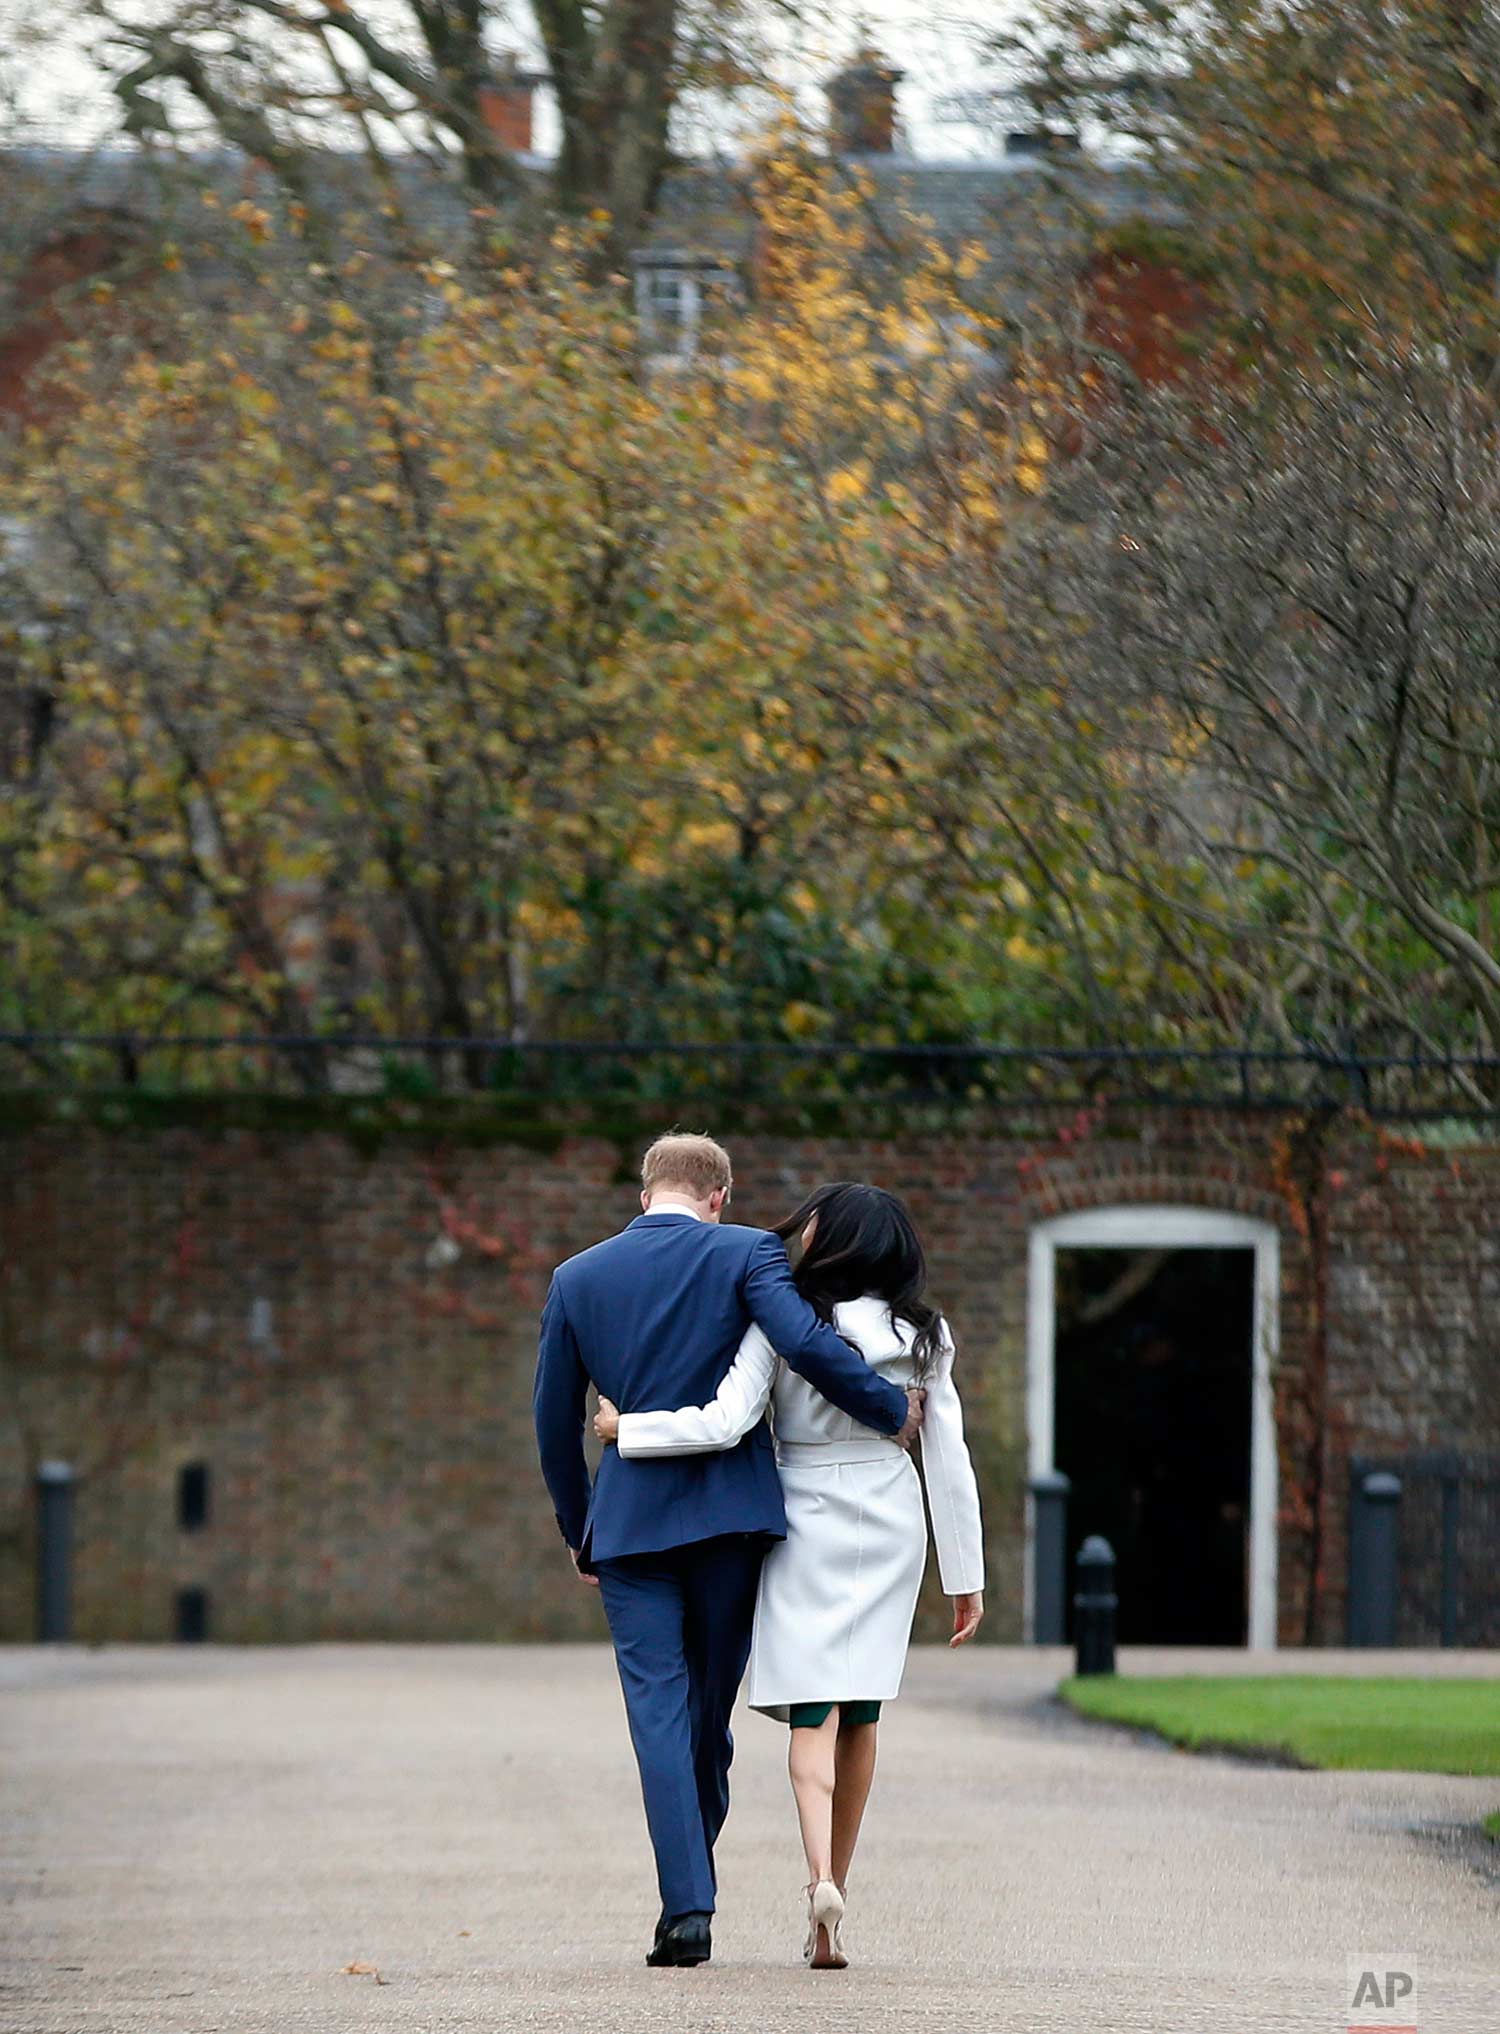  In this Monday Nov. 27, 2017 photo, Britain's Prince Harry and Meghan Markle walk away after posing for the media in the grounds of Kensington Palace in London. It was announced Monday that Prince Harry, fifth in line for the British throne, will ma